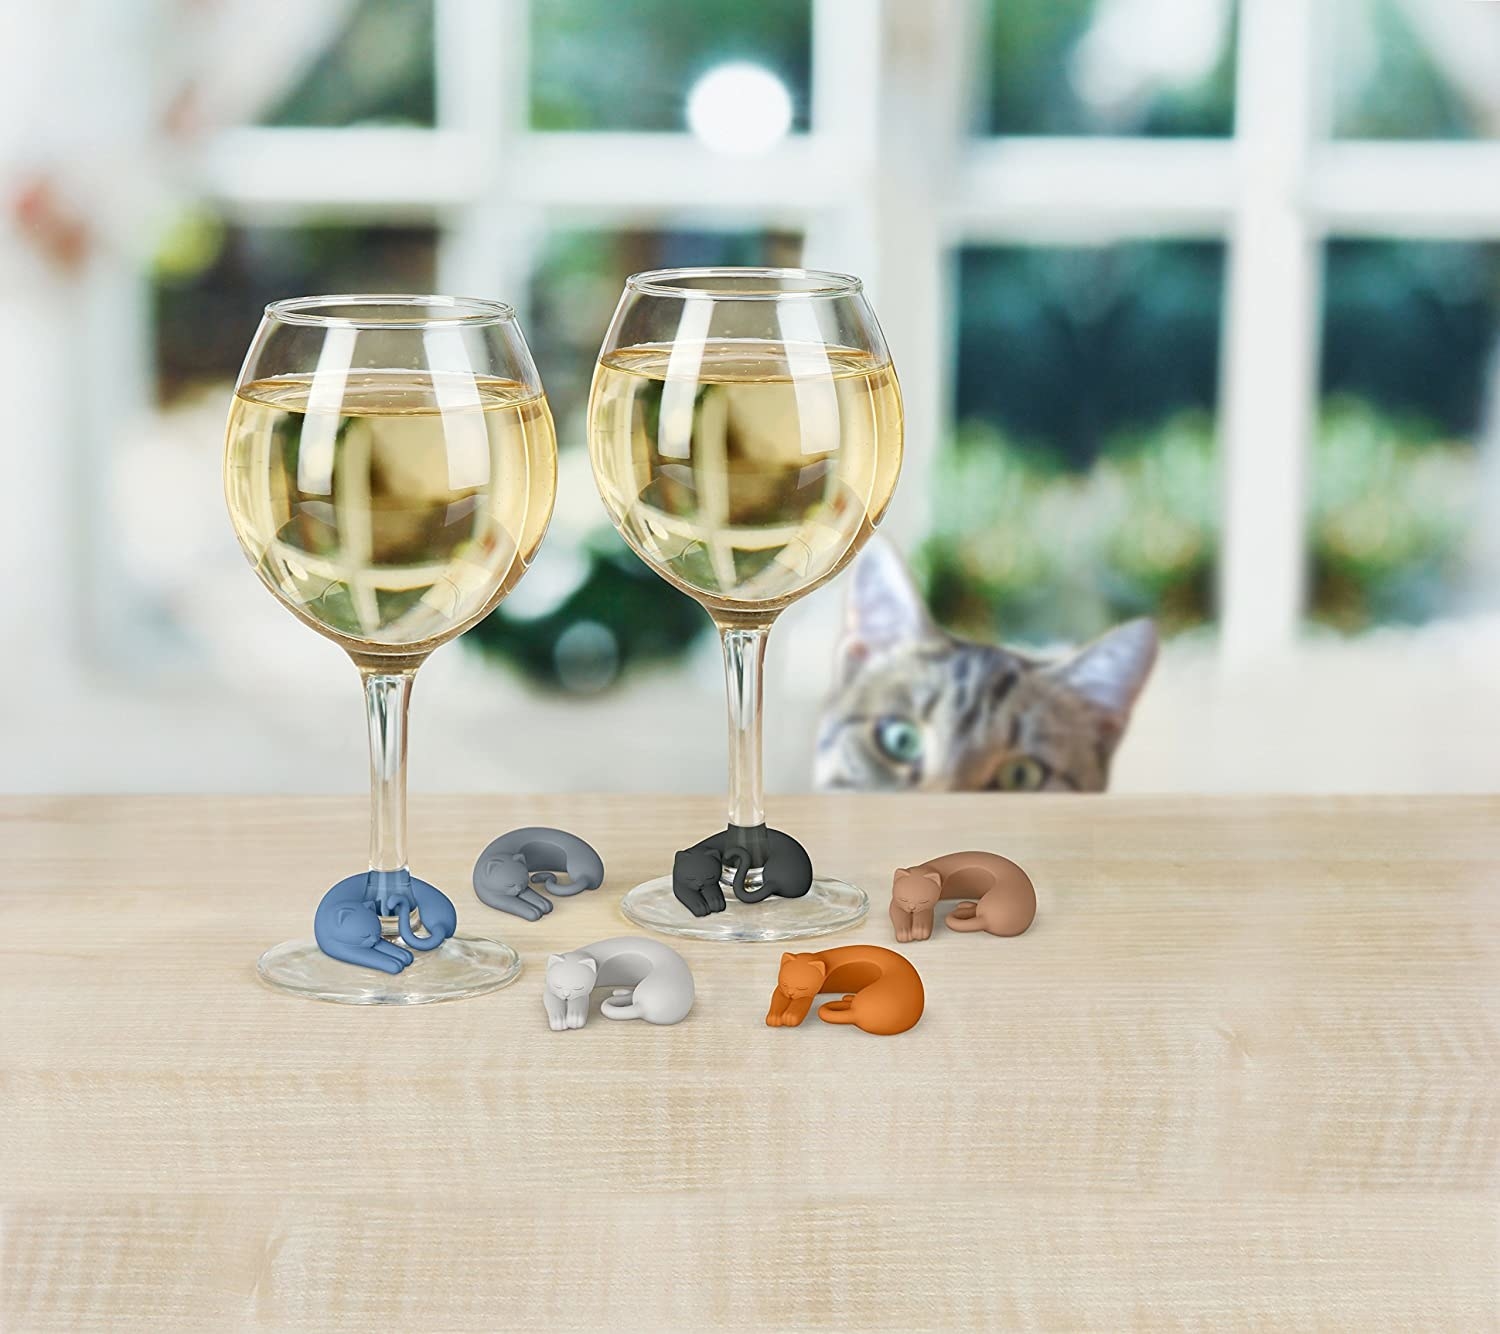 wine glass markers with two on two glasses of white wine and a cat peeking at them